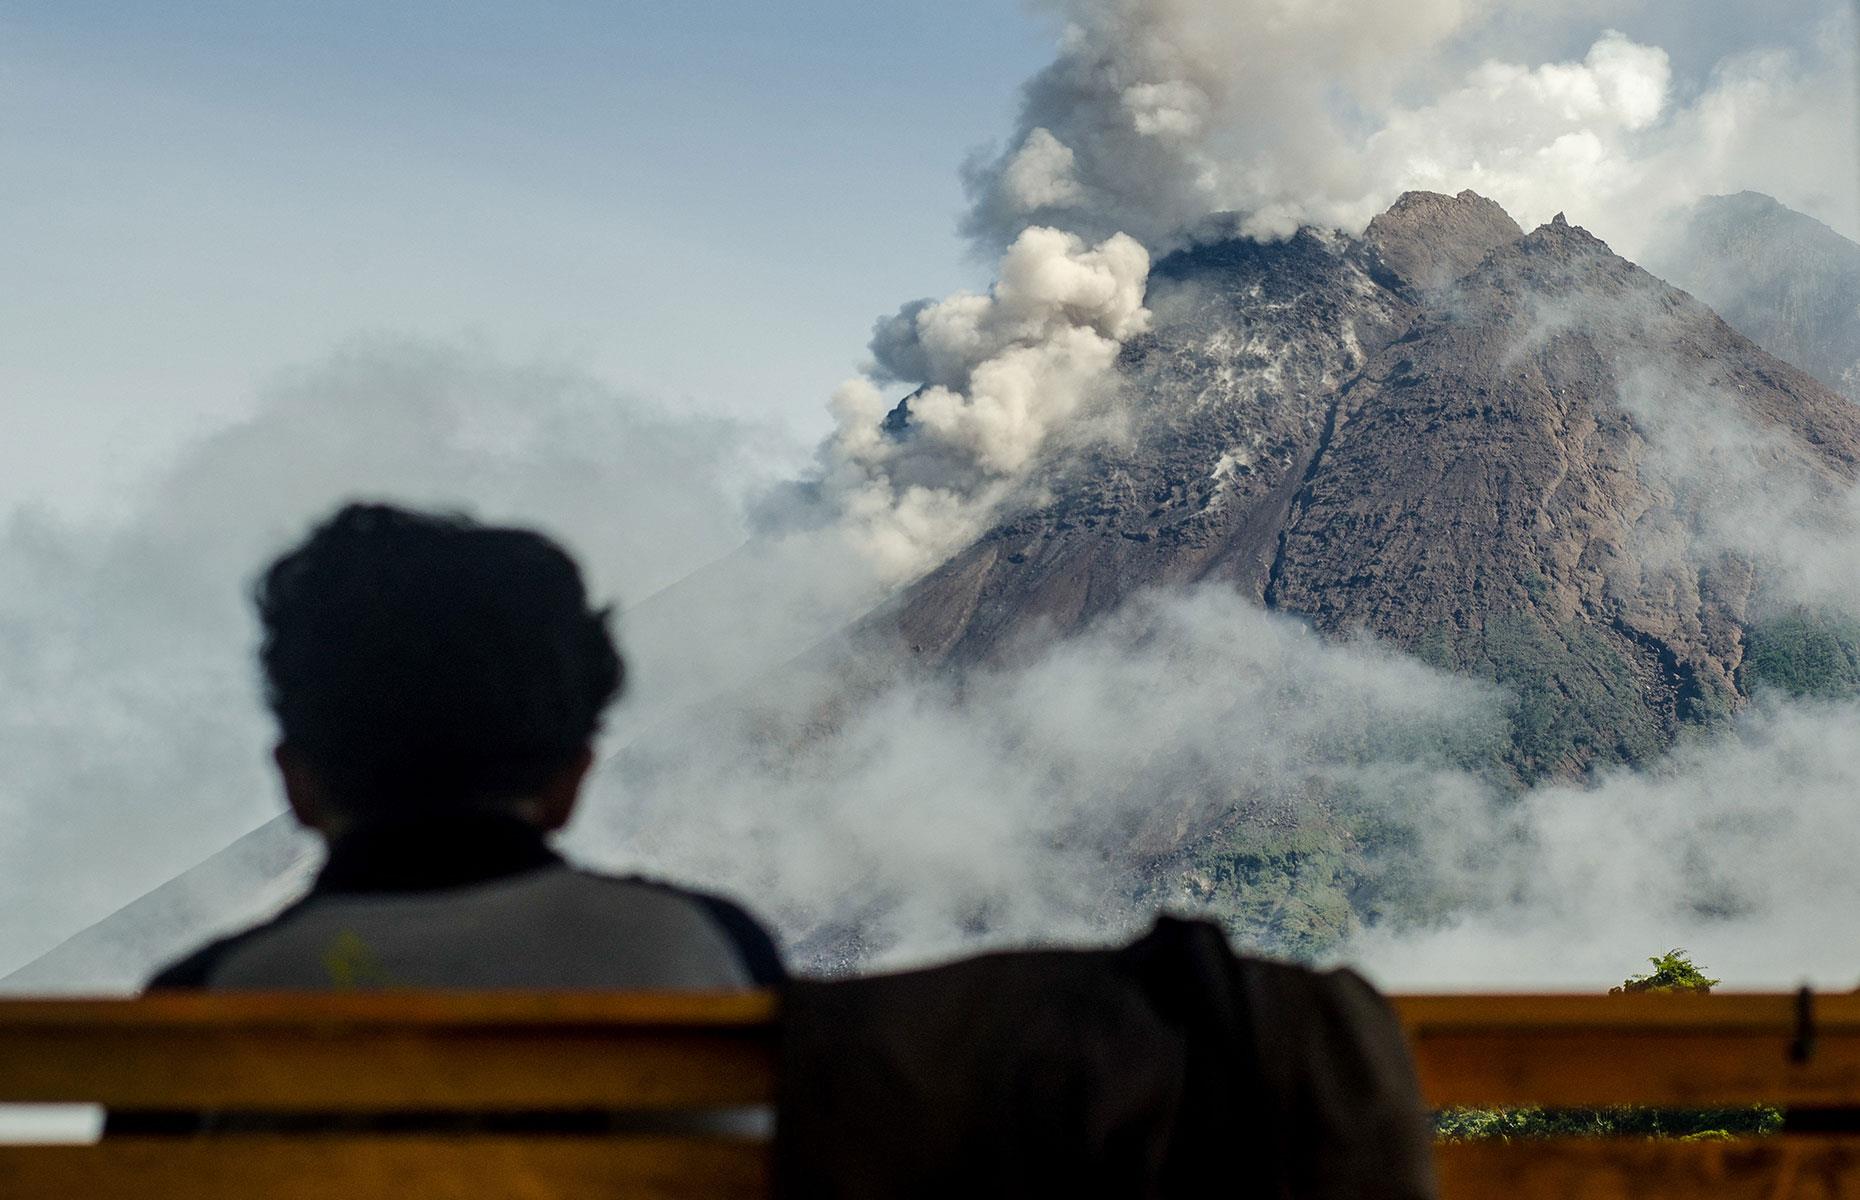 <p>Towards the end of November 2021, the volcano was still emitting lava and white smoke. The latter can still be seen in this photo from early December. The <a href="https://en.antaranews.com/news/201165/mount-merapi-emits-incandescent-lava-15-times">Center of Geological Disaster Technology Research and Development</a> has so far not changed the status of Mount Merapi from Level III, or 'standby'.</p>  <p><a href="https://www.loveexploring.com/galleries/91033/historys-most-deadly-and-destructive-forest-fires"><strong>These are history's most deadly and destructive forest fires</strong></a></p>